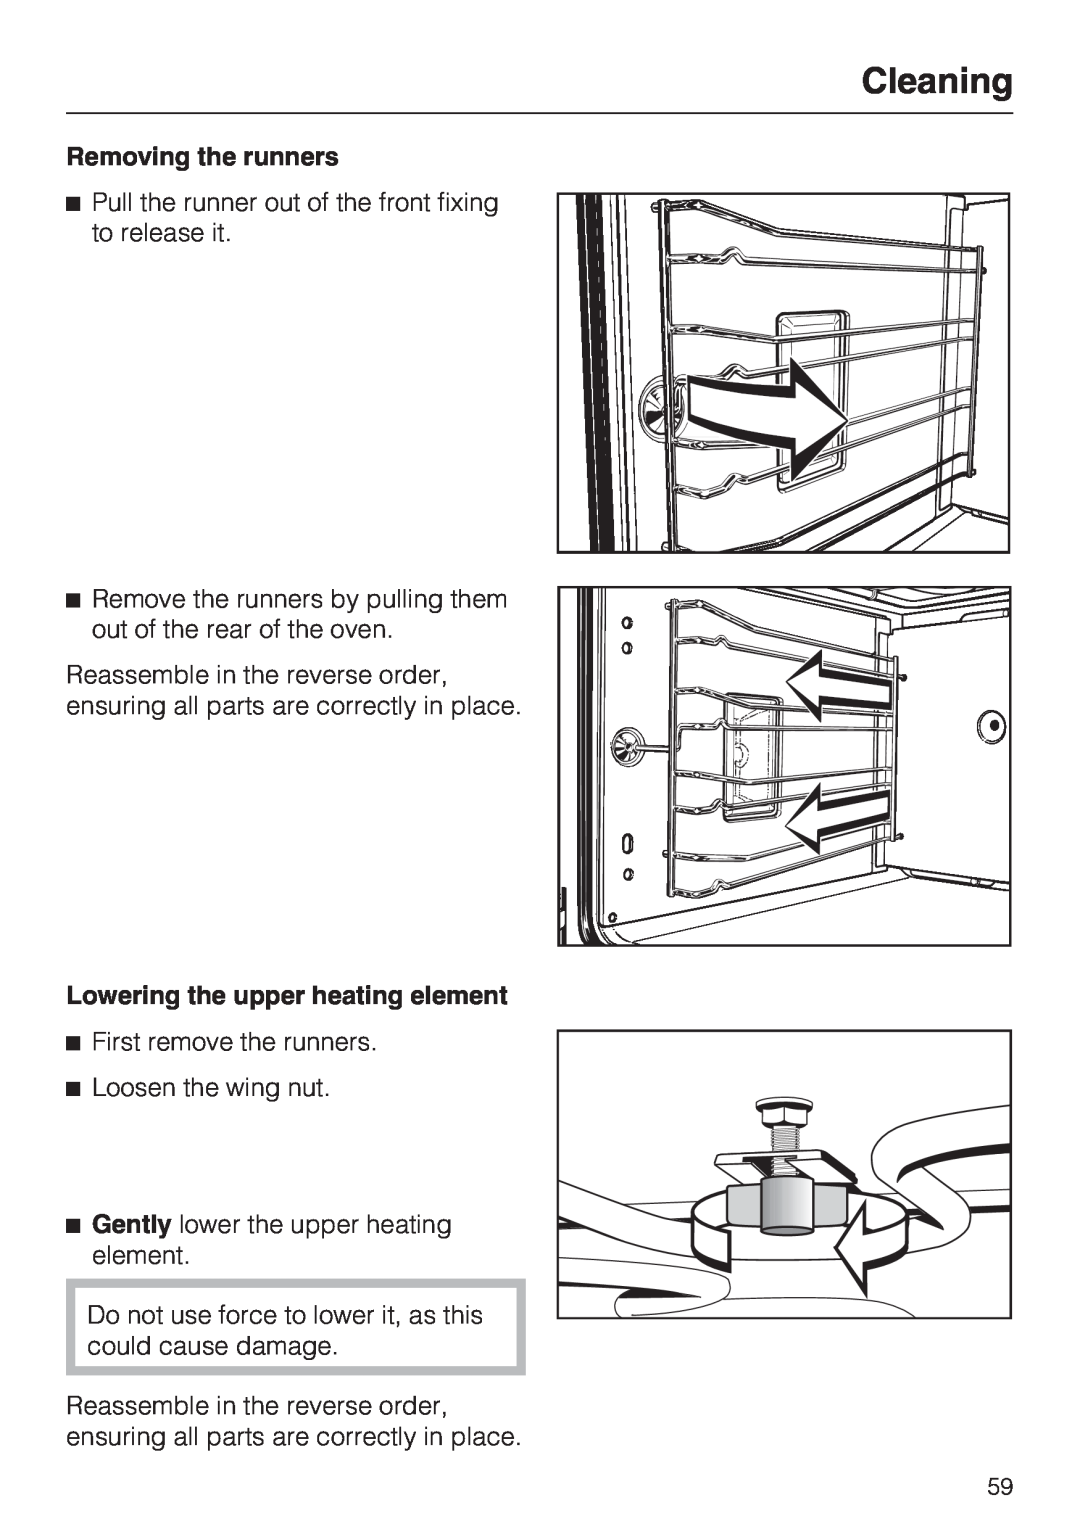 Miele H 4786 BP, H 4784 BP installation instructions Cleaning, Removing the runners, Lowering the upper heating element 